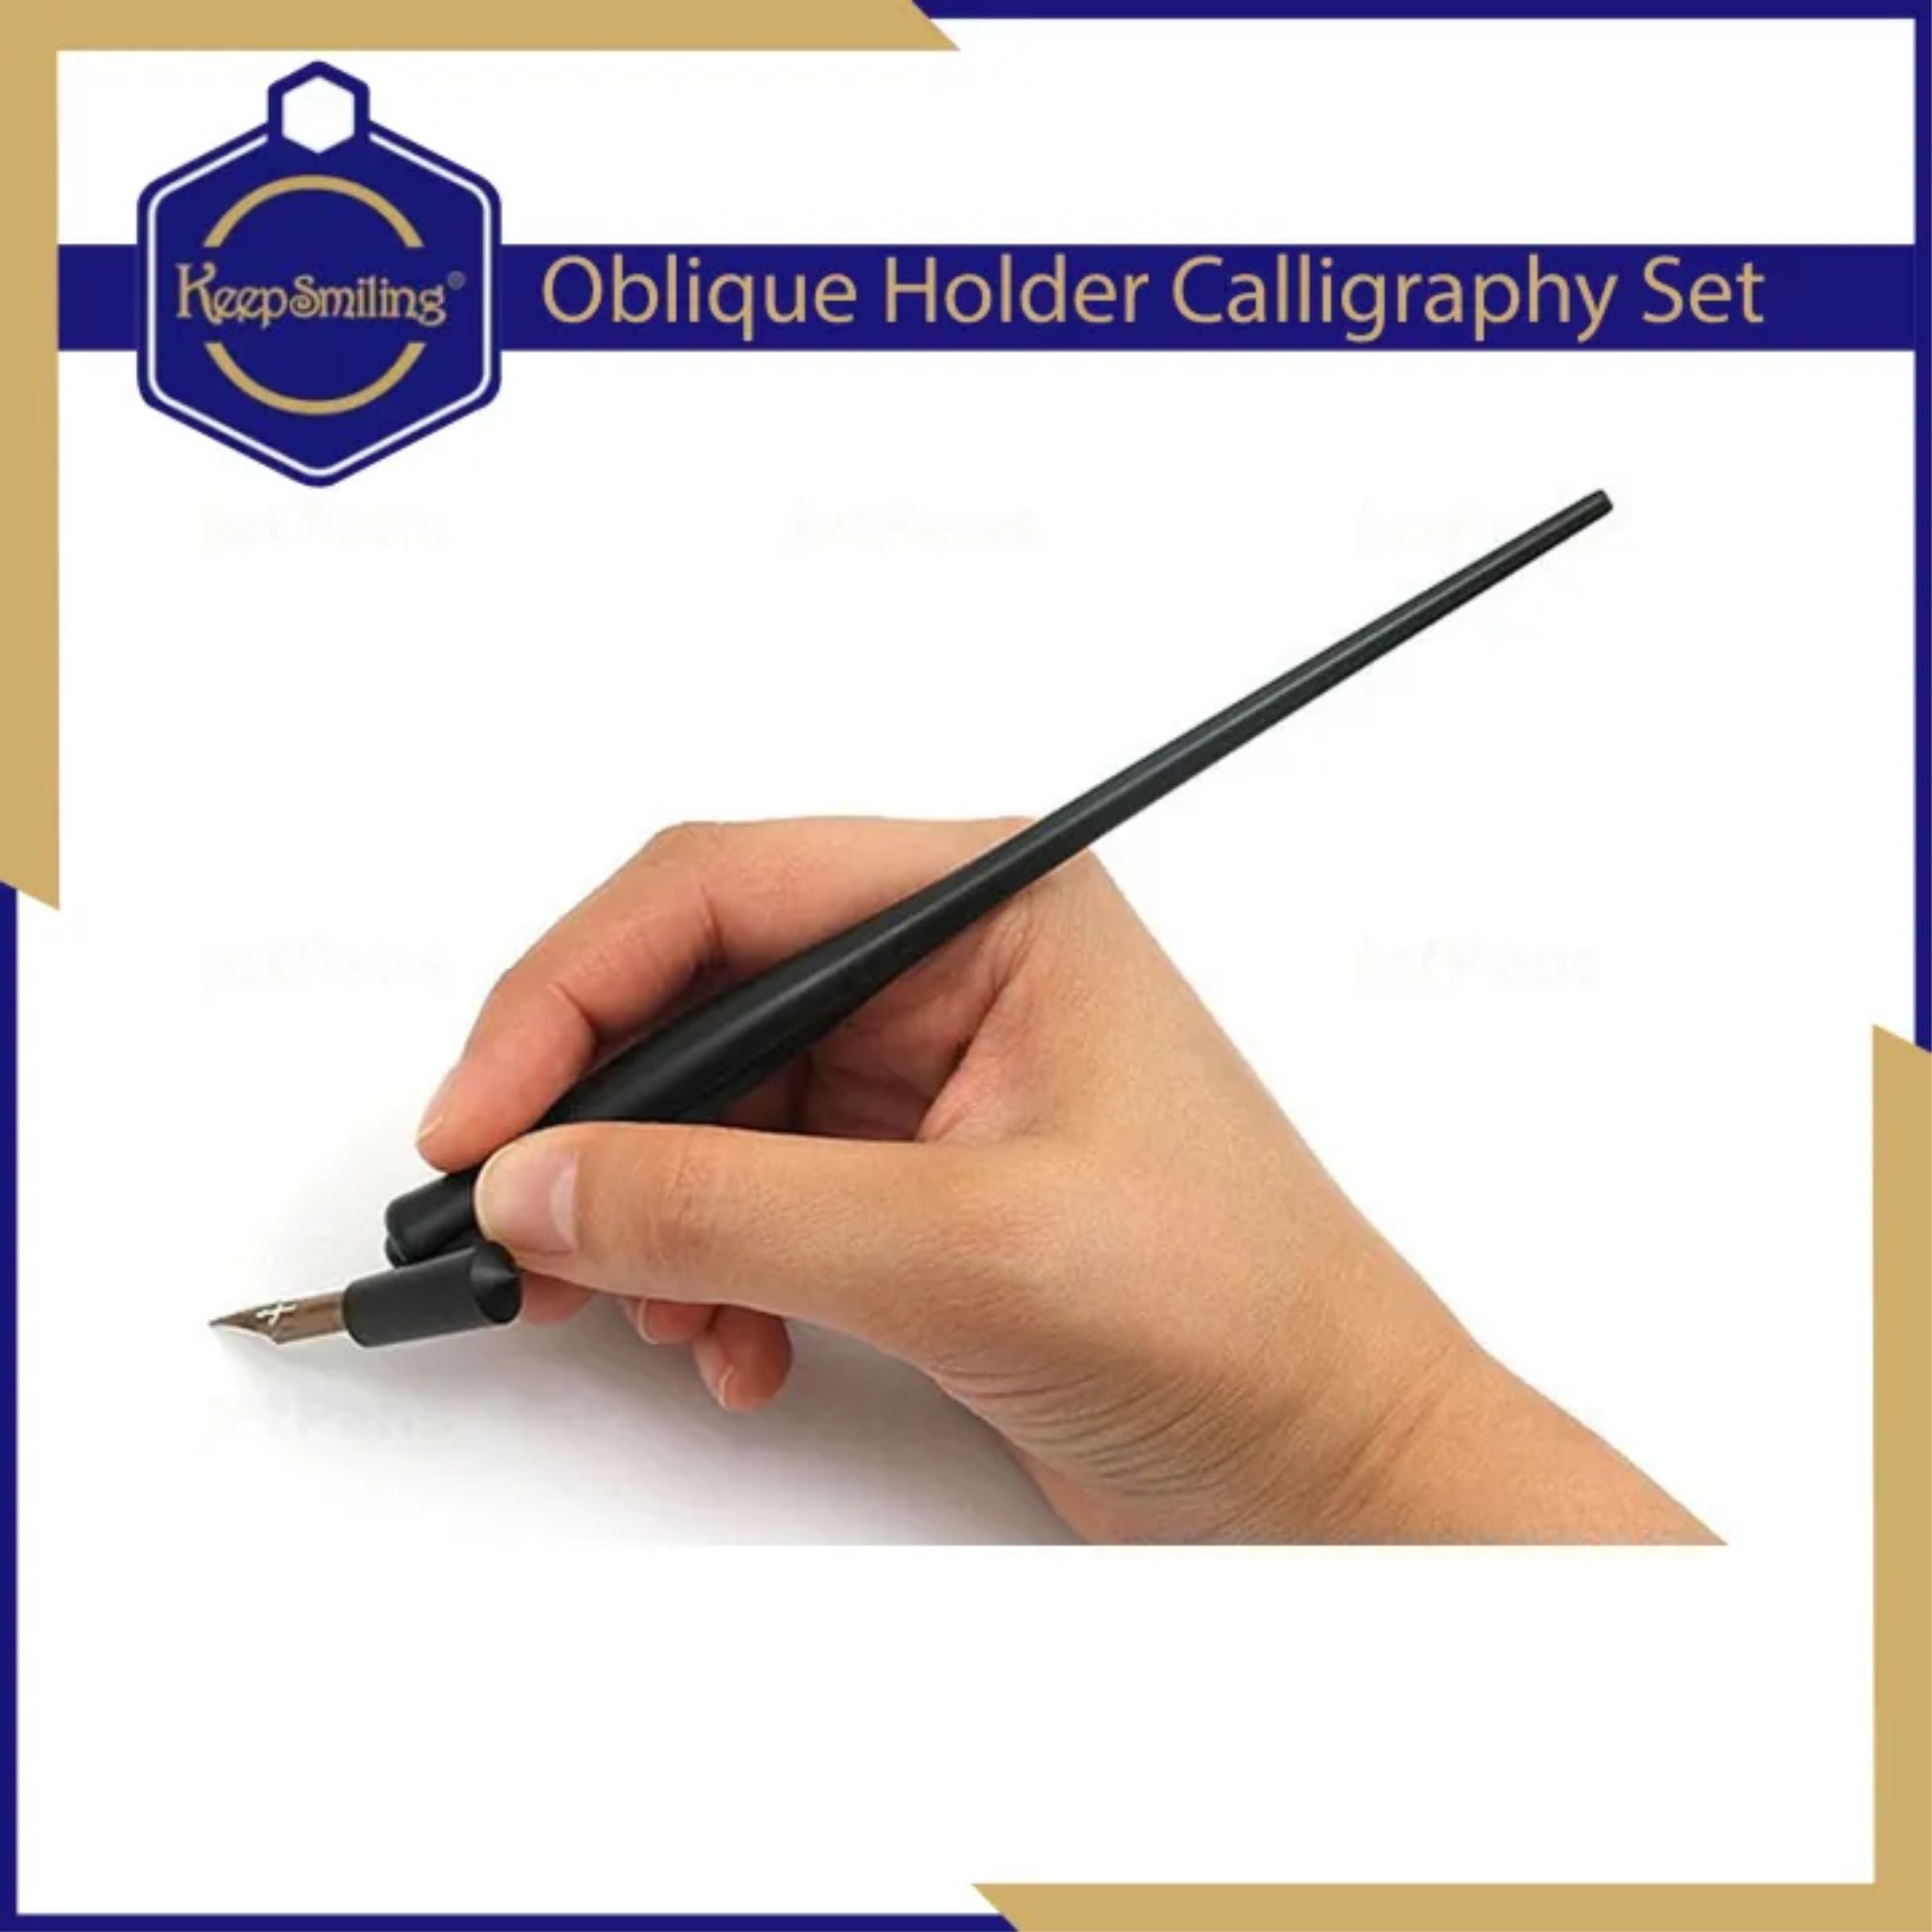 Keep Smiling Oblique Calligraphy Pen with 5 Nibs